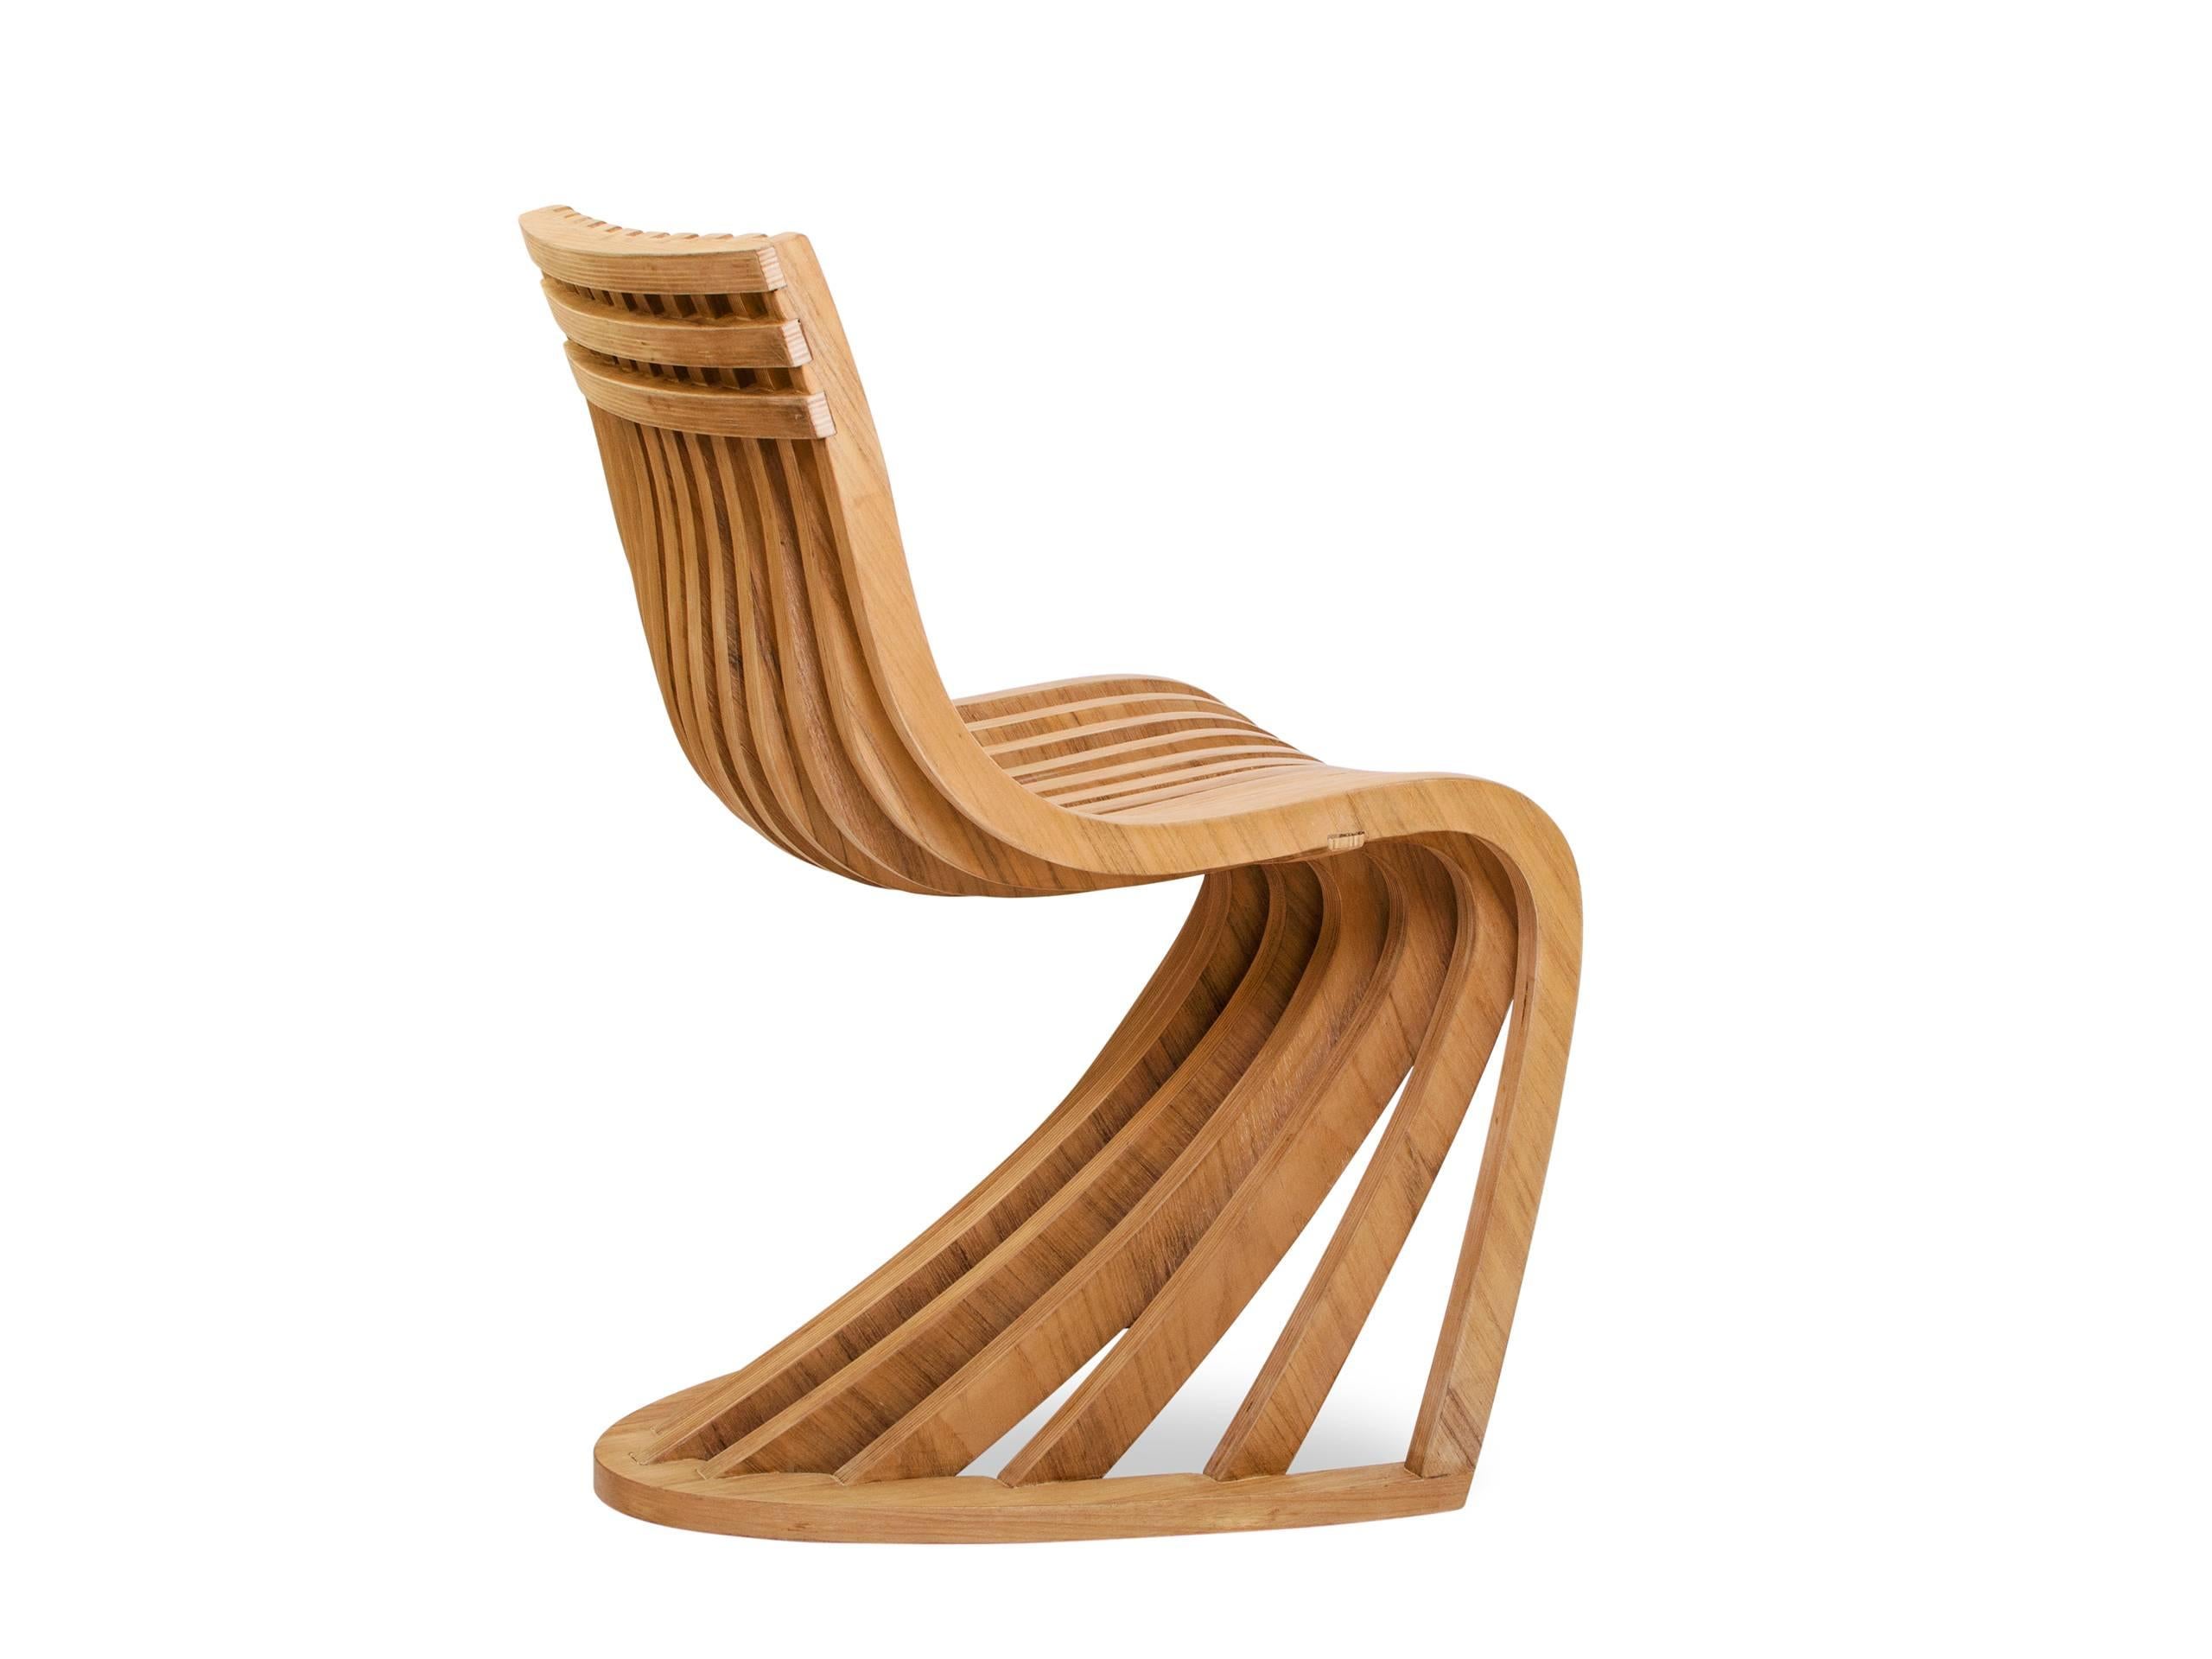 The original design of the Pantosh easychair was born of the fusion of two pieces of furniture: the Panton chair by Danish architect Verner Panton (created in 1968), and the Willow chair, designed by Scottish architect Charles Rennie Mackintosh